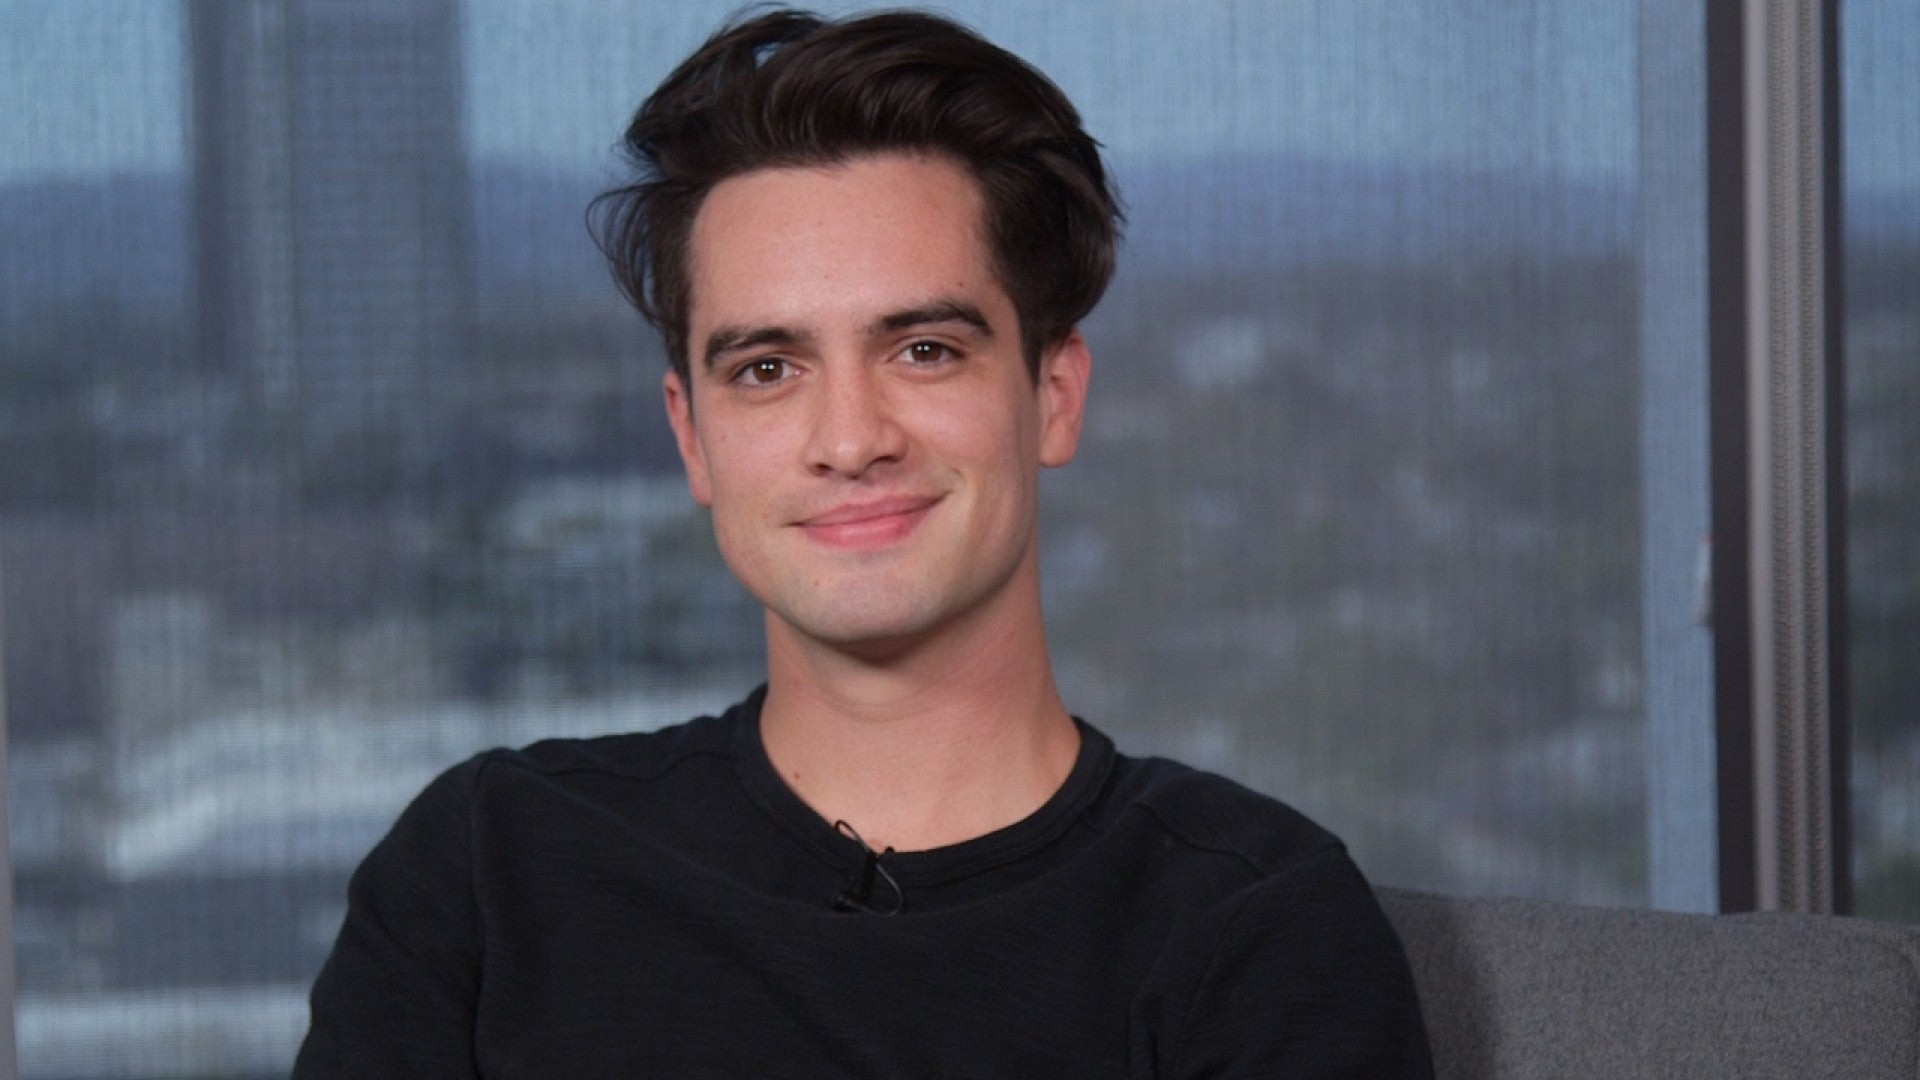 How do I get my hair cutto look like Brendon Urie. What length does it have  to be, do I have to go to a stylist and what exactly should I ask